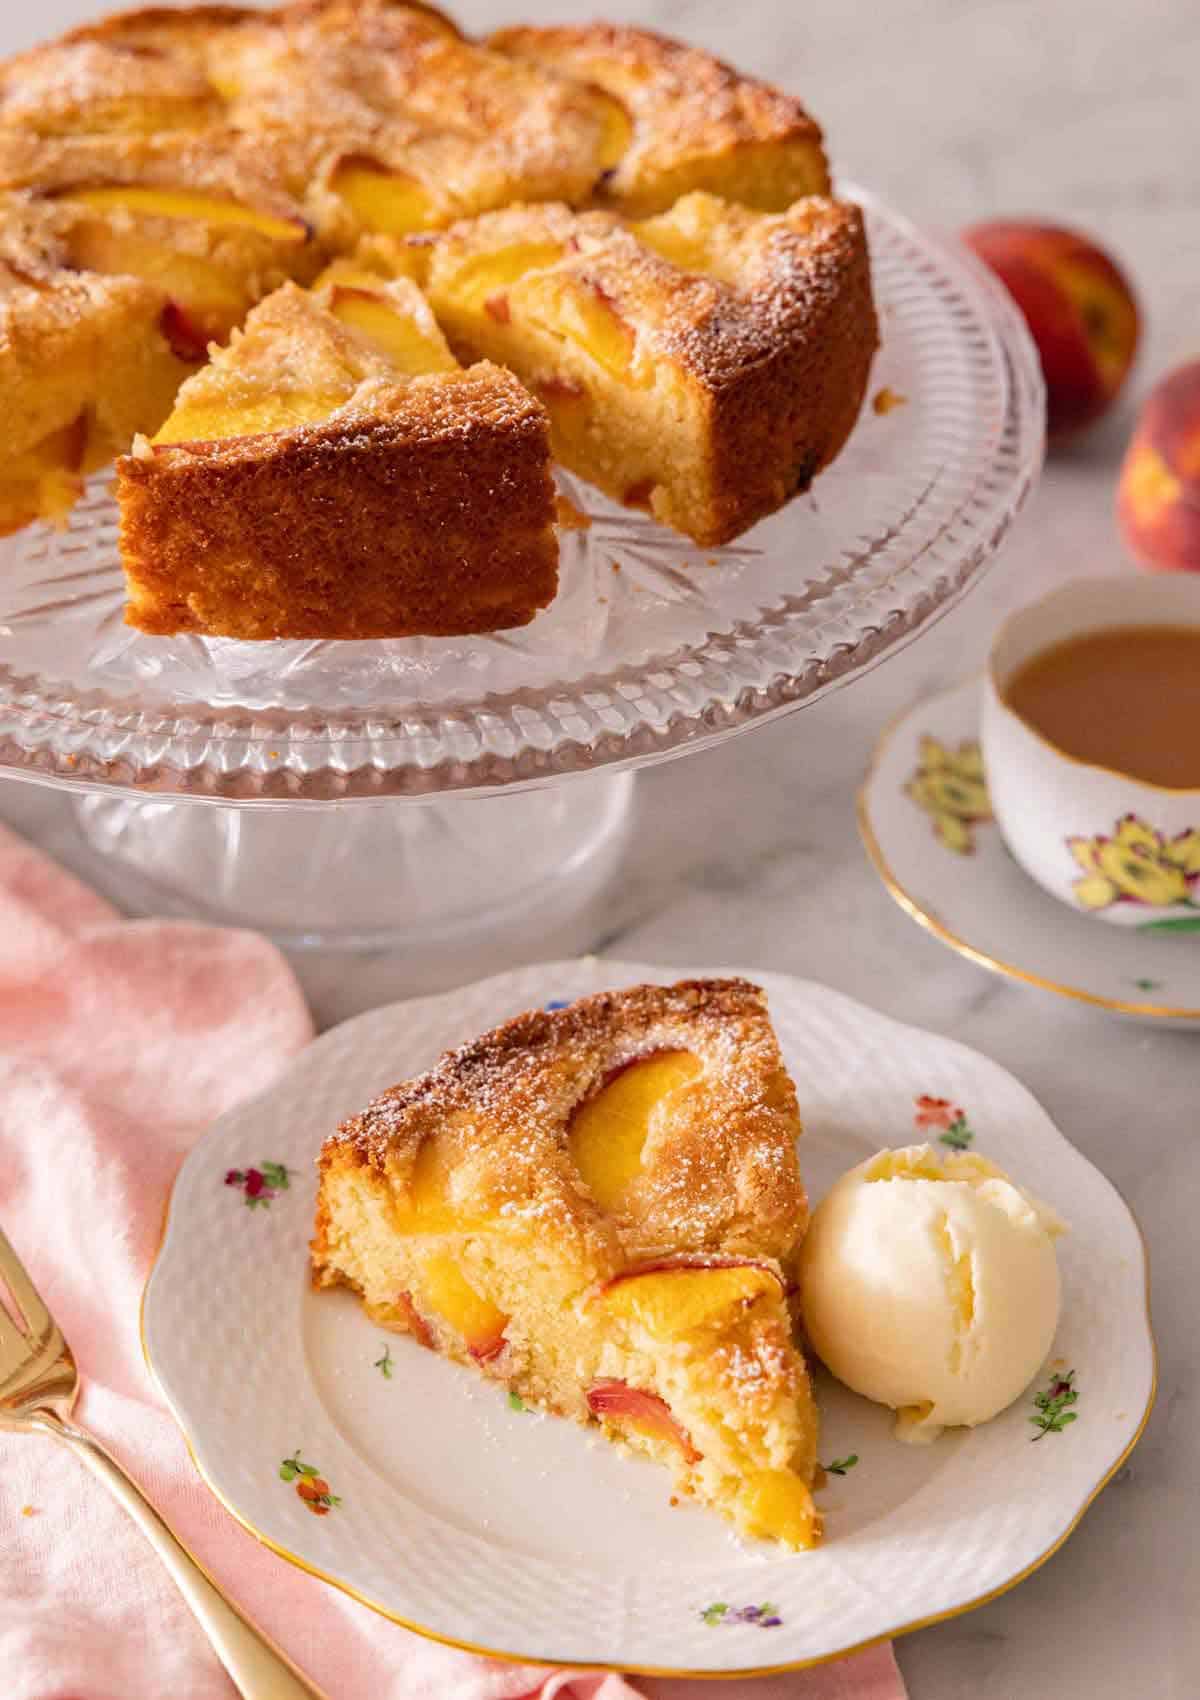 A slice of peach cake with a scoop of ice cream by a cake stand with the rest of the peach cake.